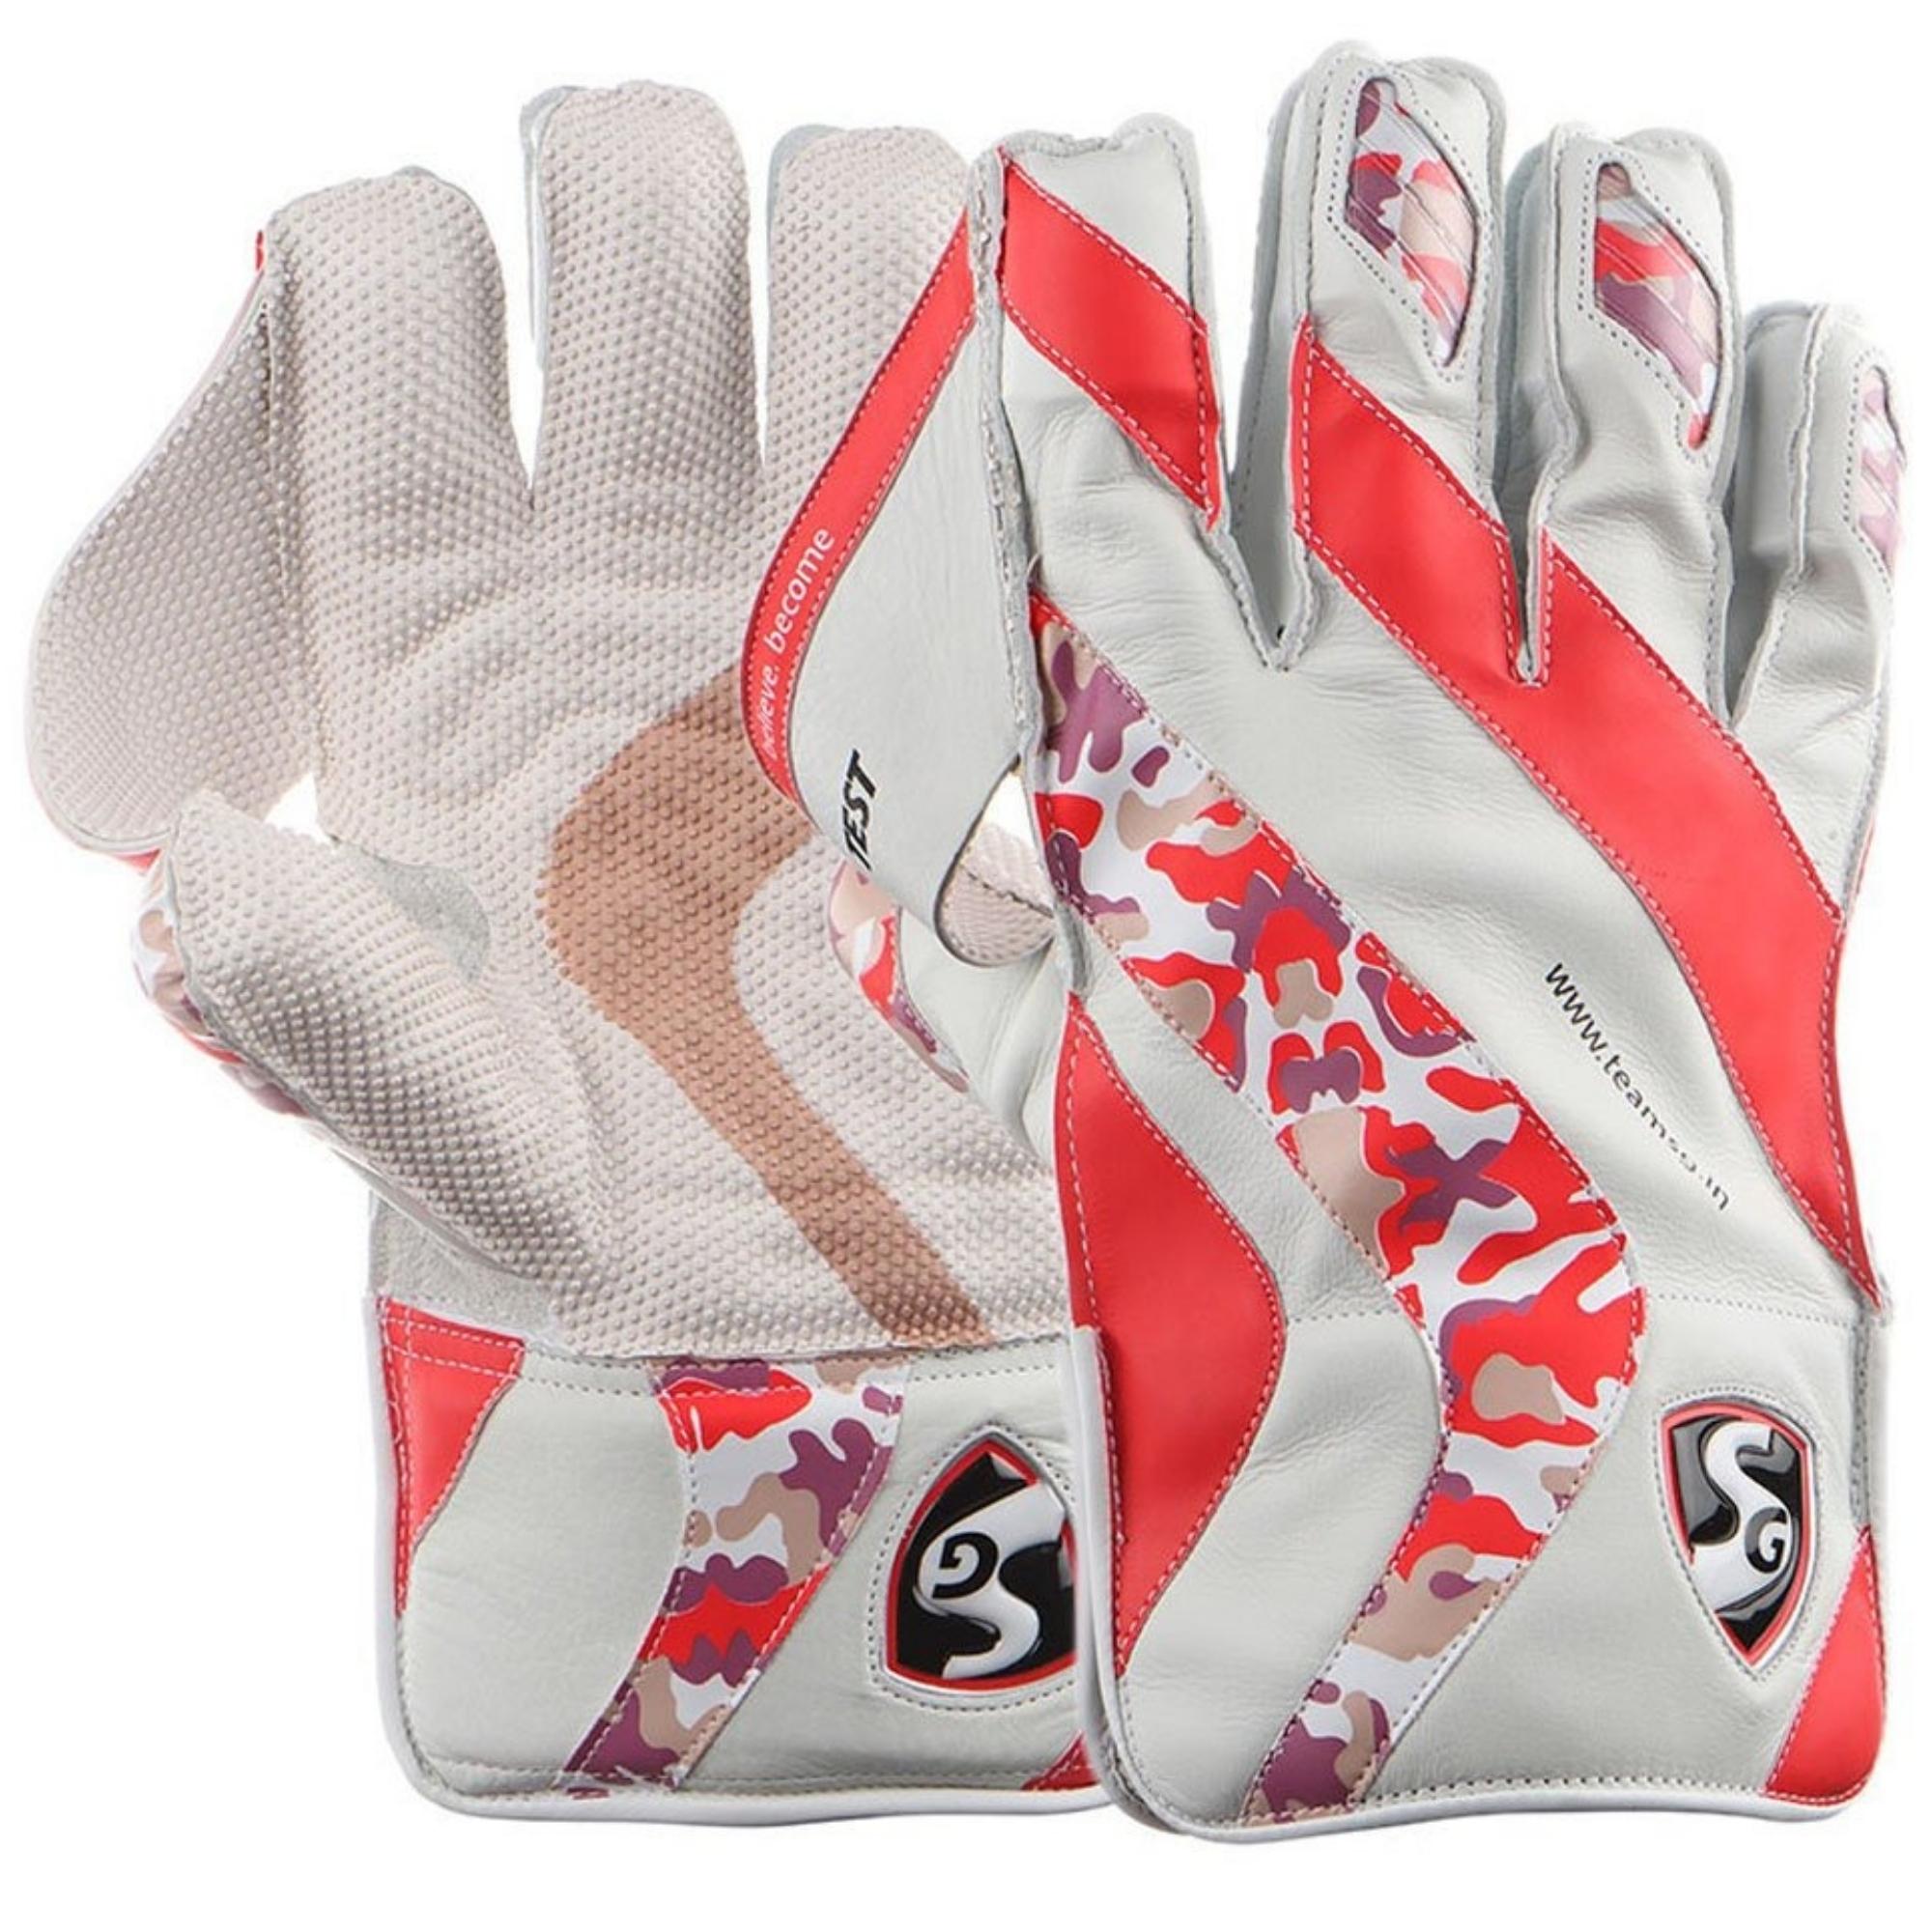 SG Wicket Keeping Gloves | SG Test